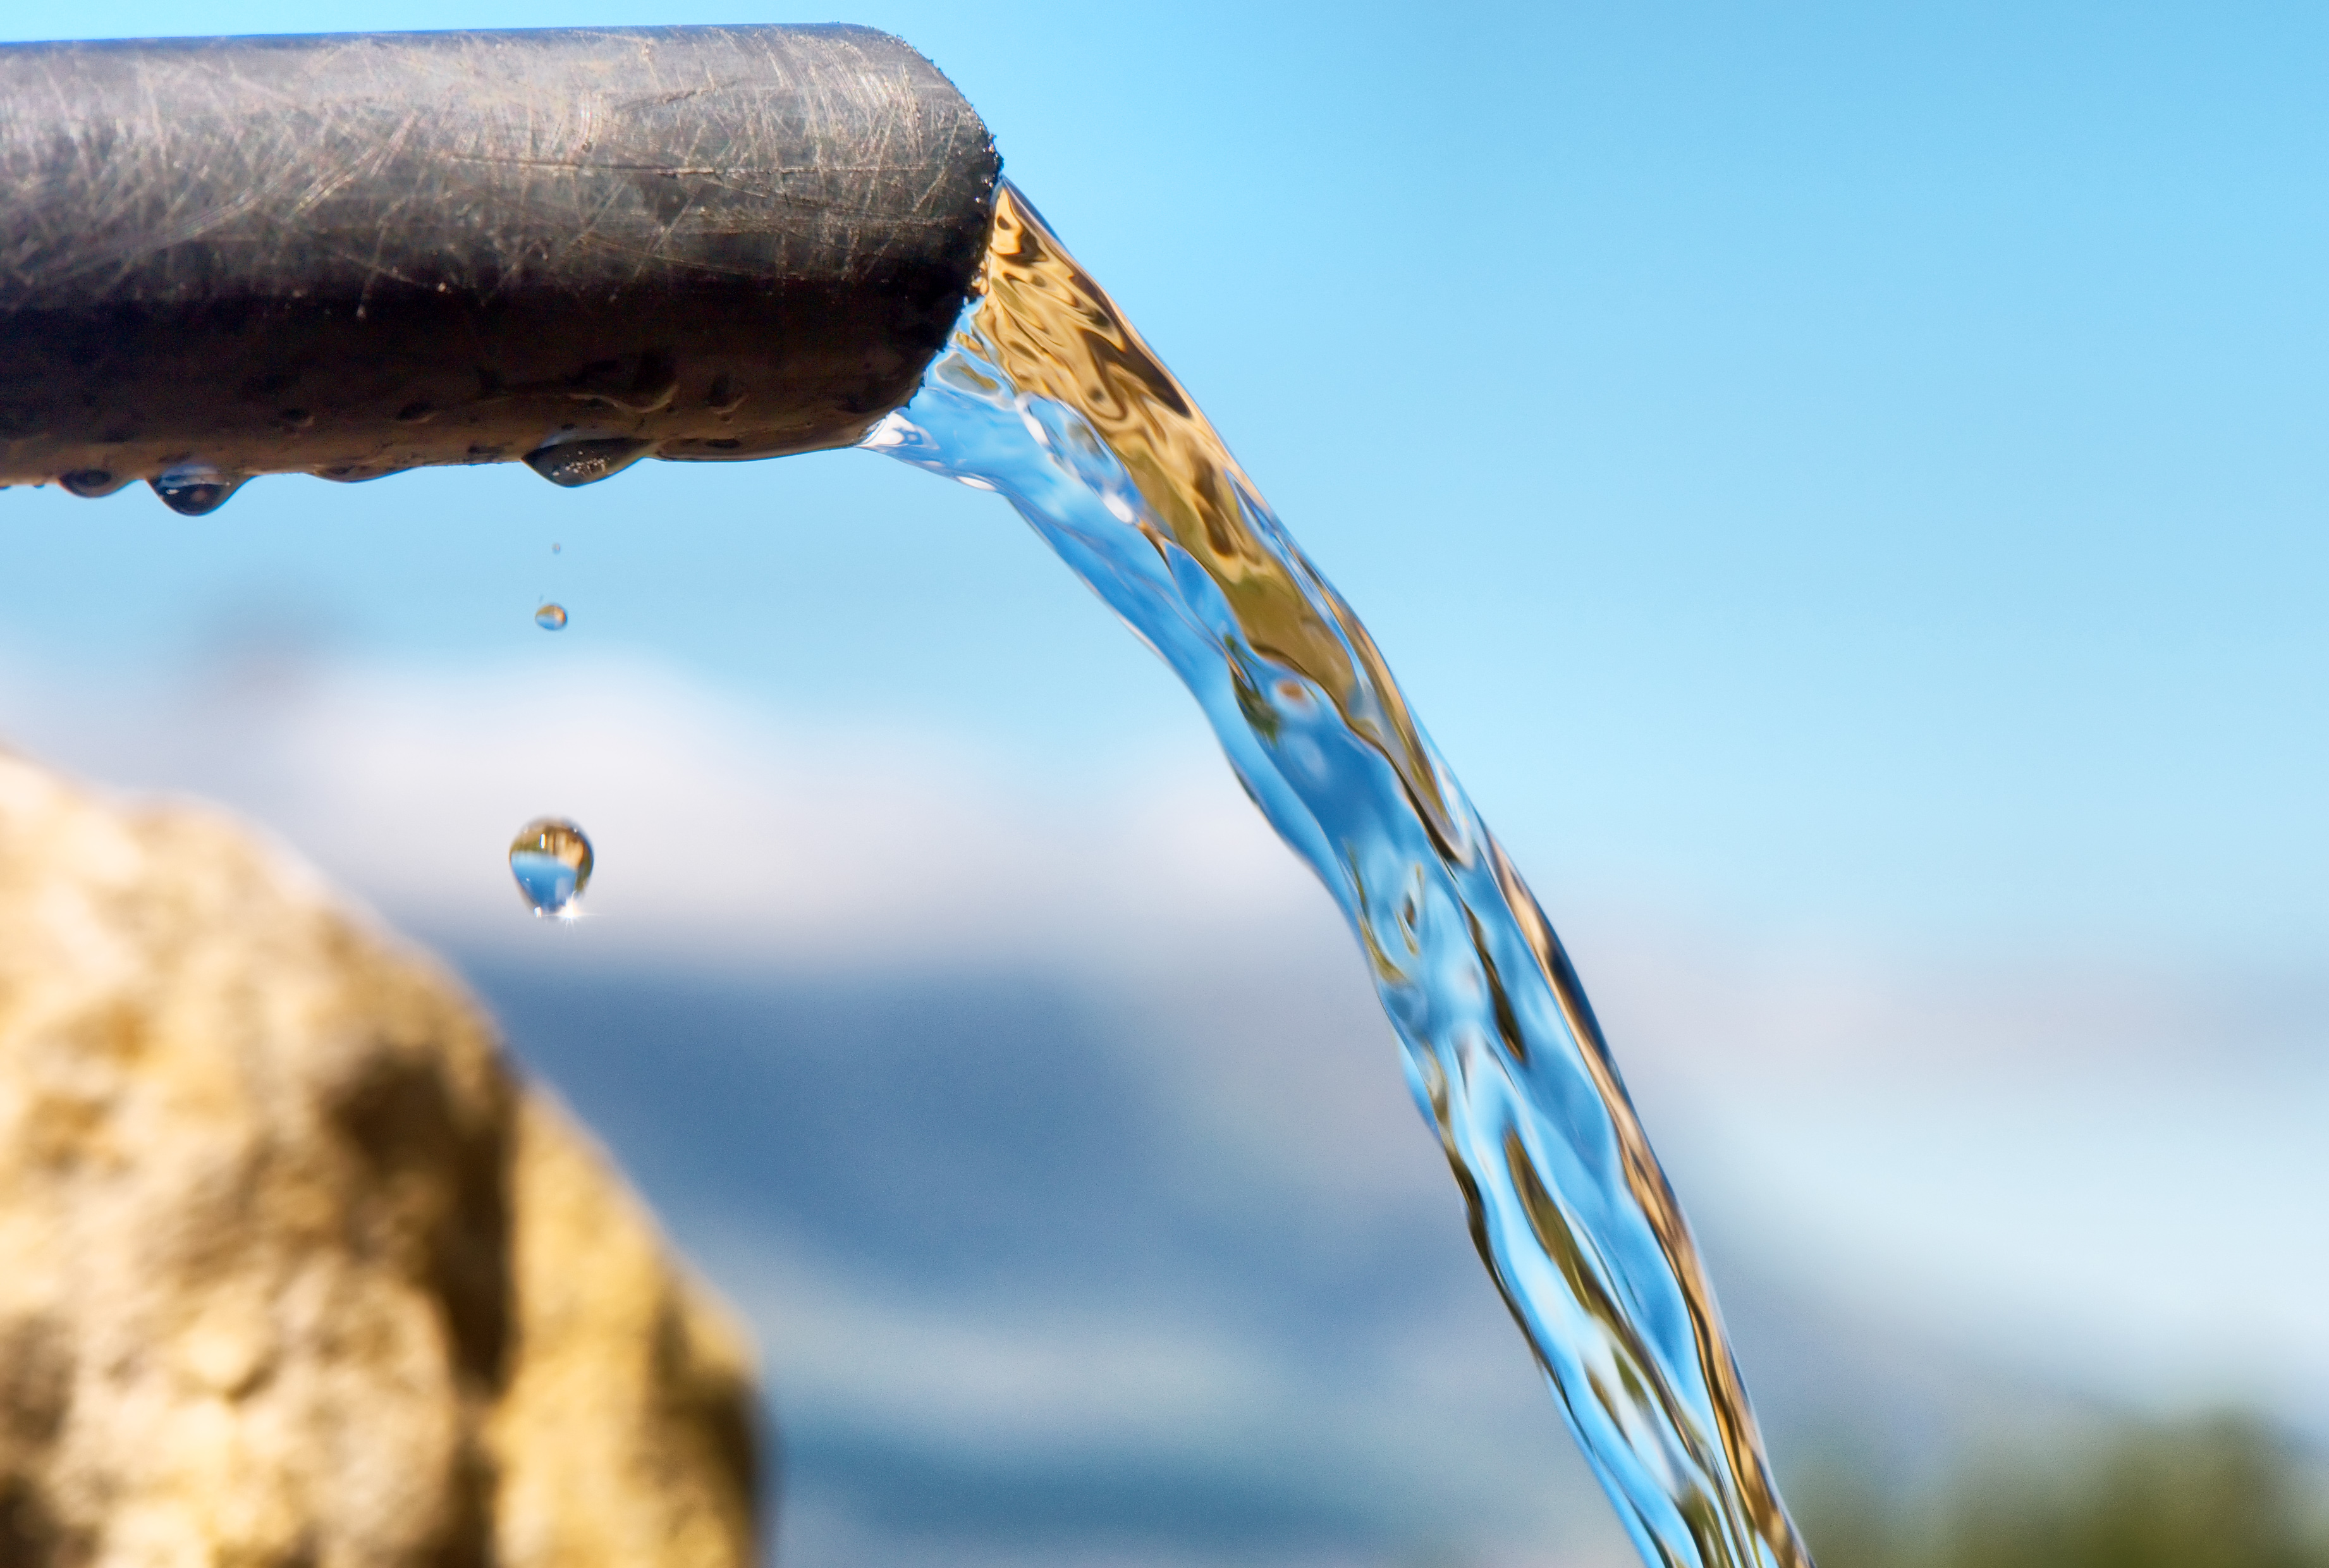 Water flowing from pipe against blurred mountains